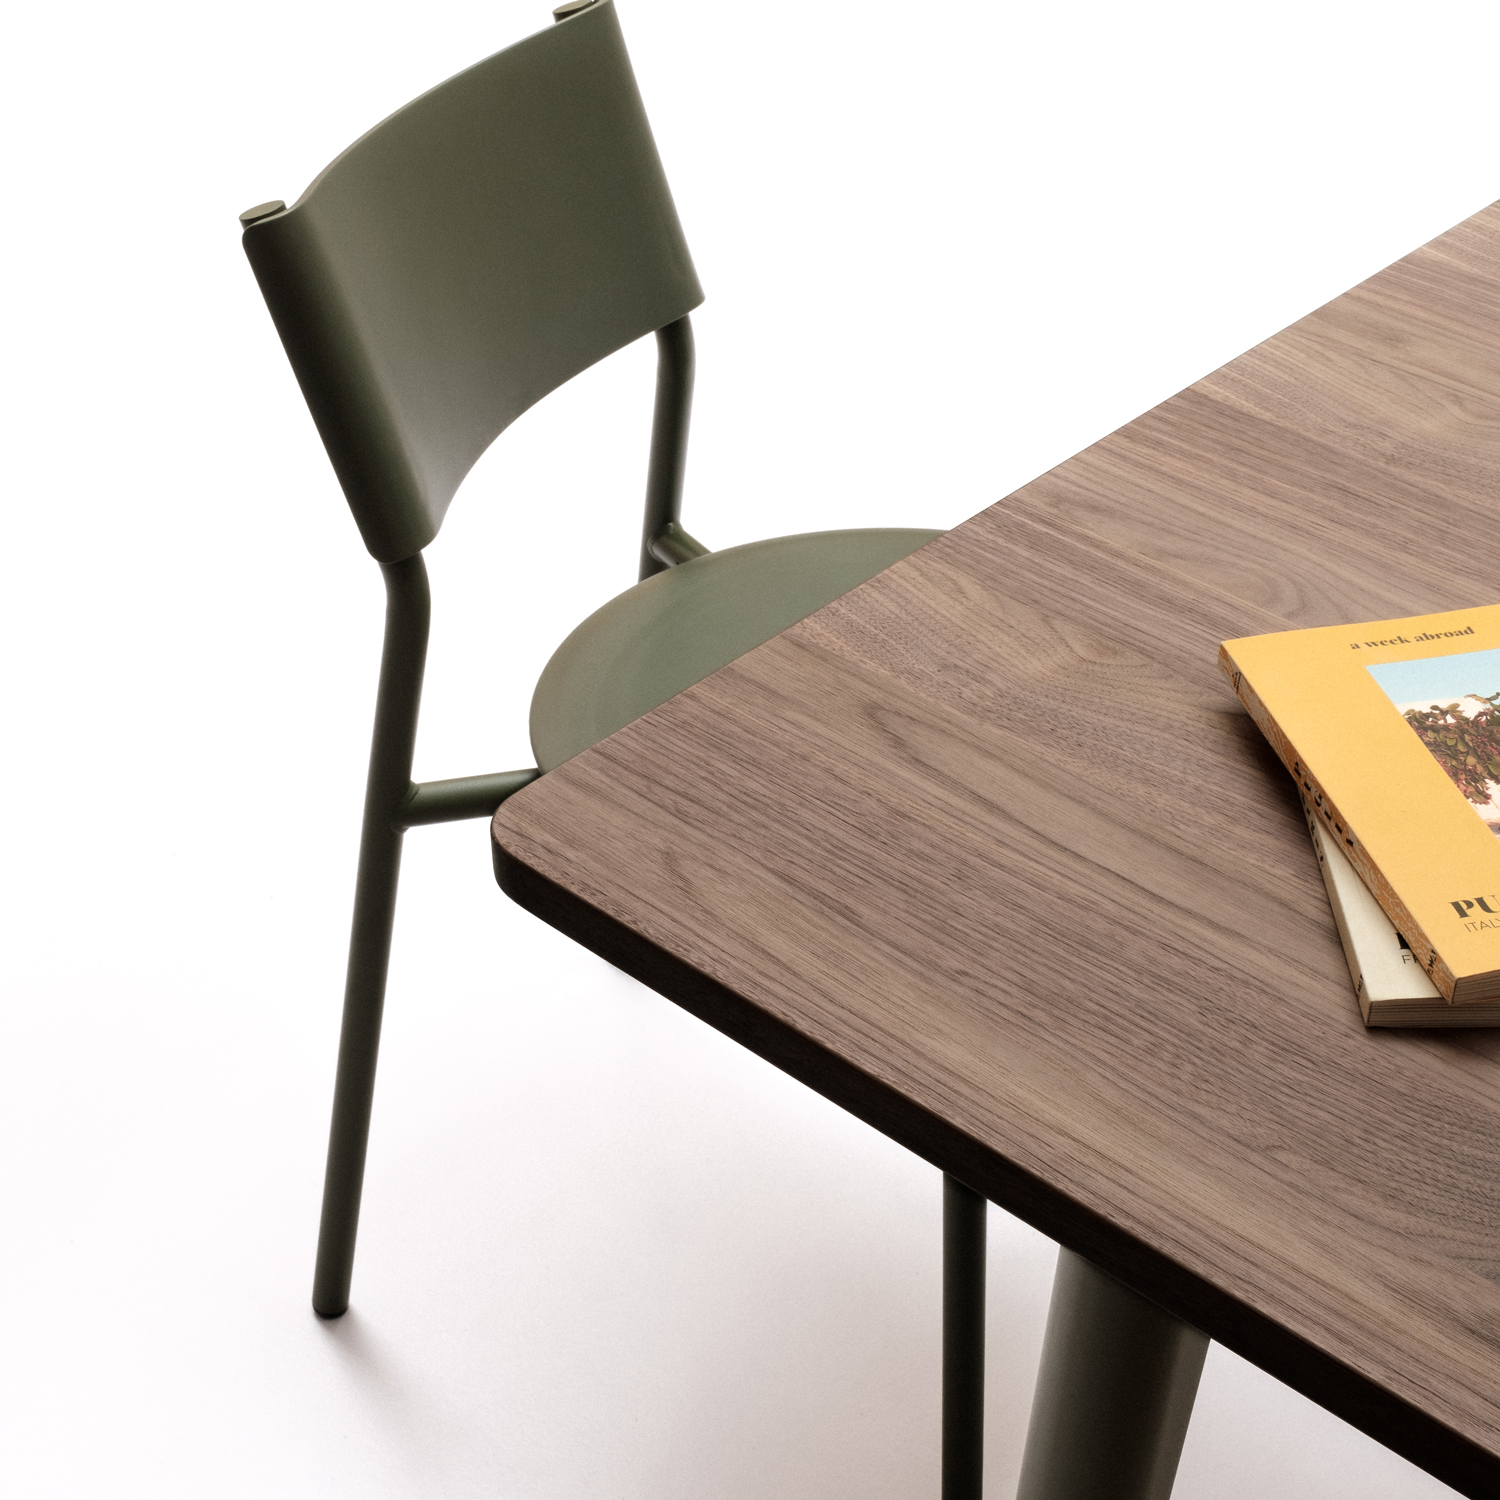 NEW MODERN dining table - eco-certified walnut